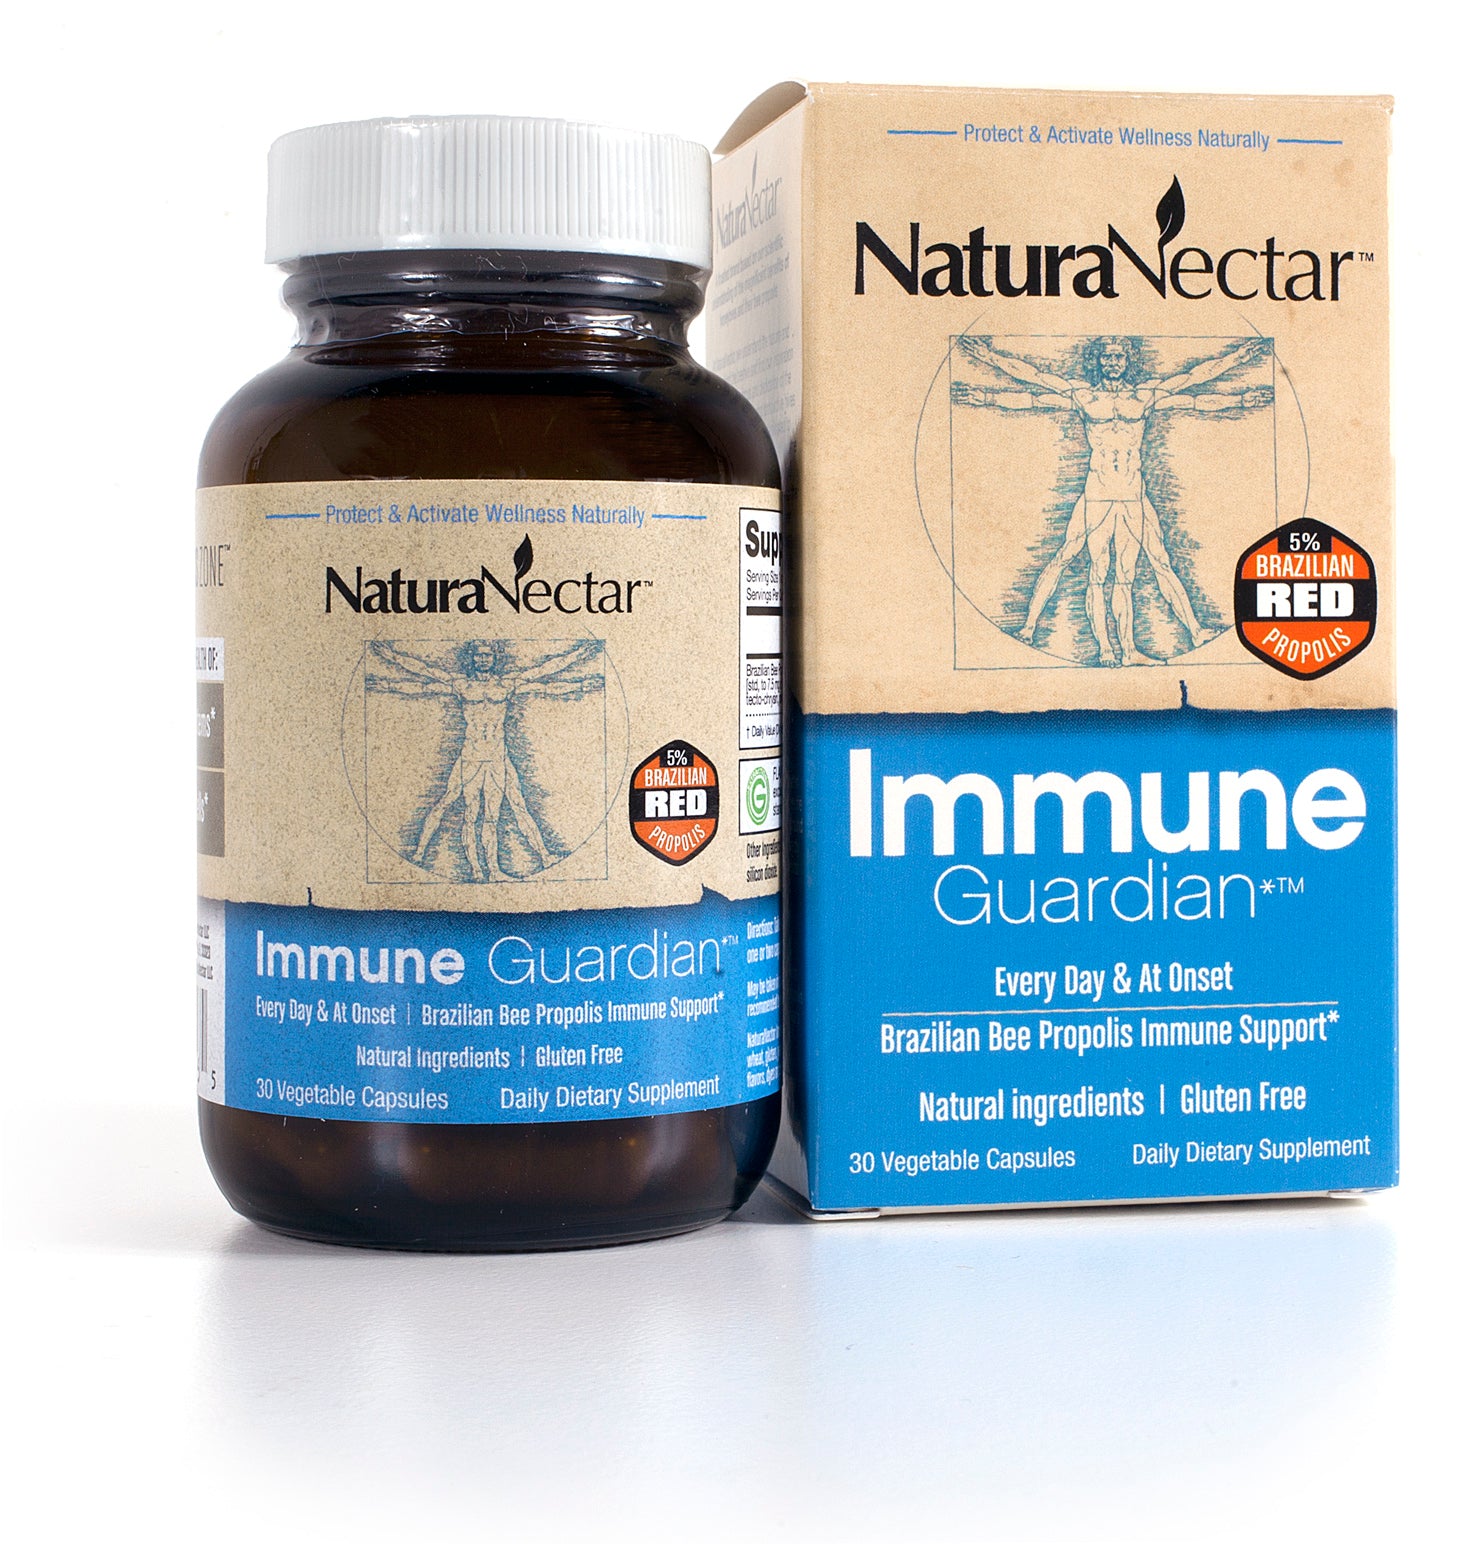 Immune Guardian(TM) 30 Veggie Capsules | Every Day & At Onset Immune Support*